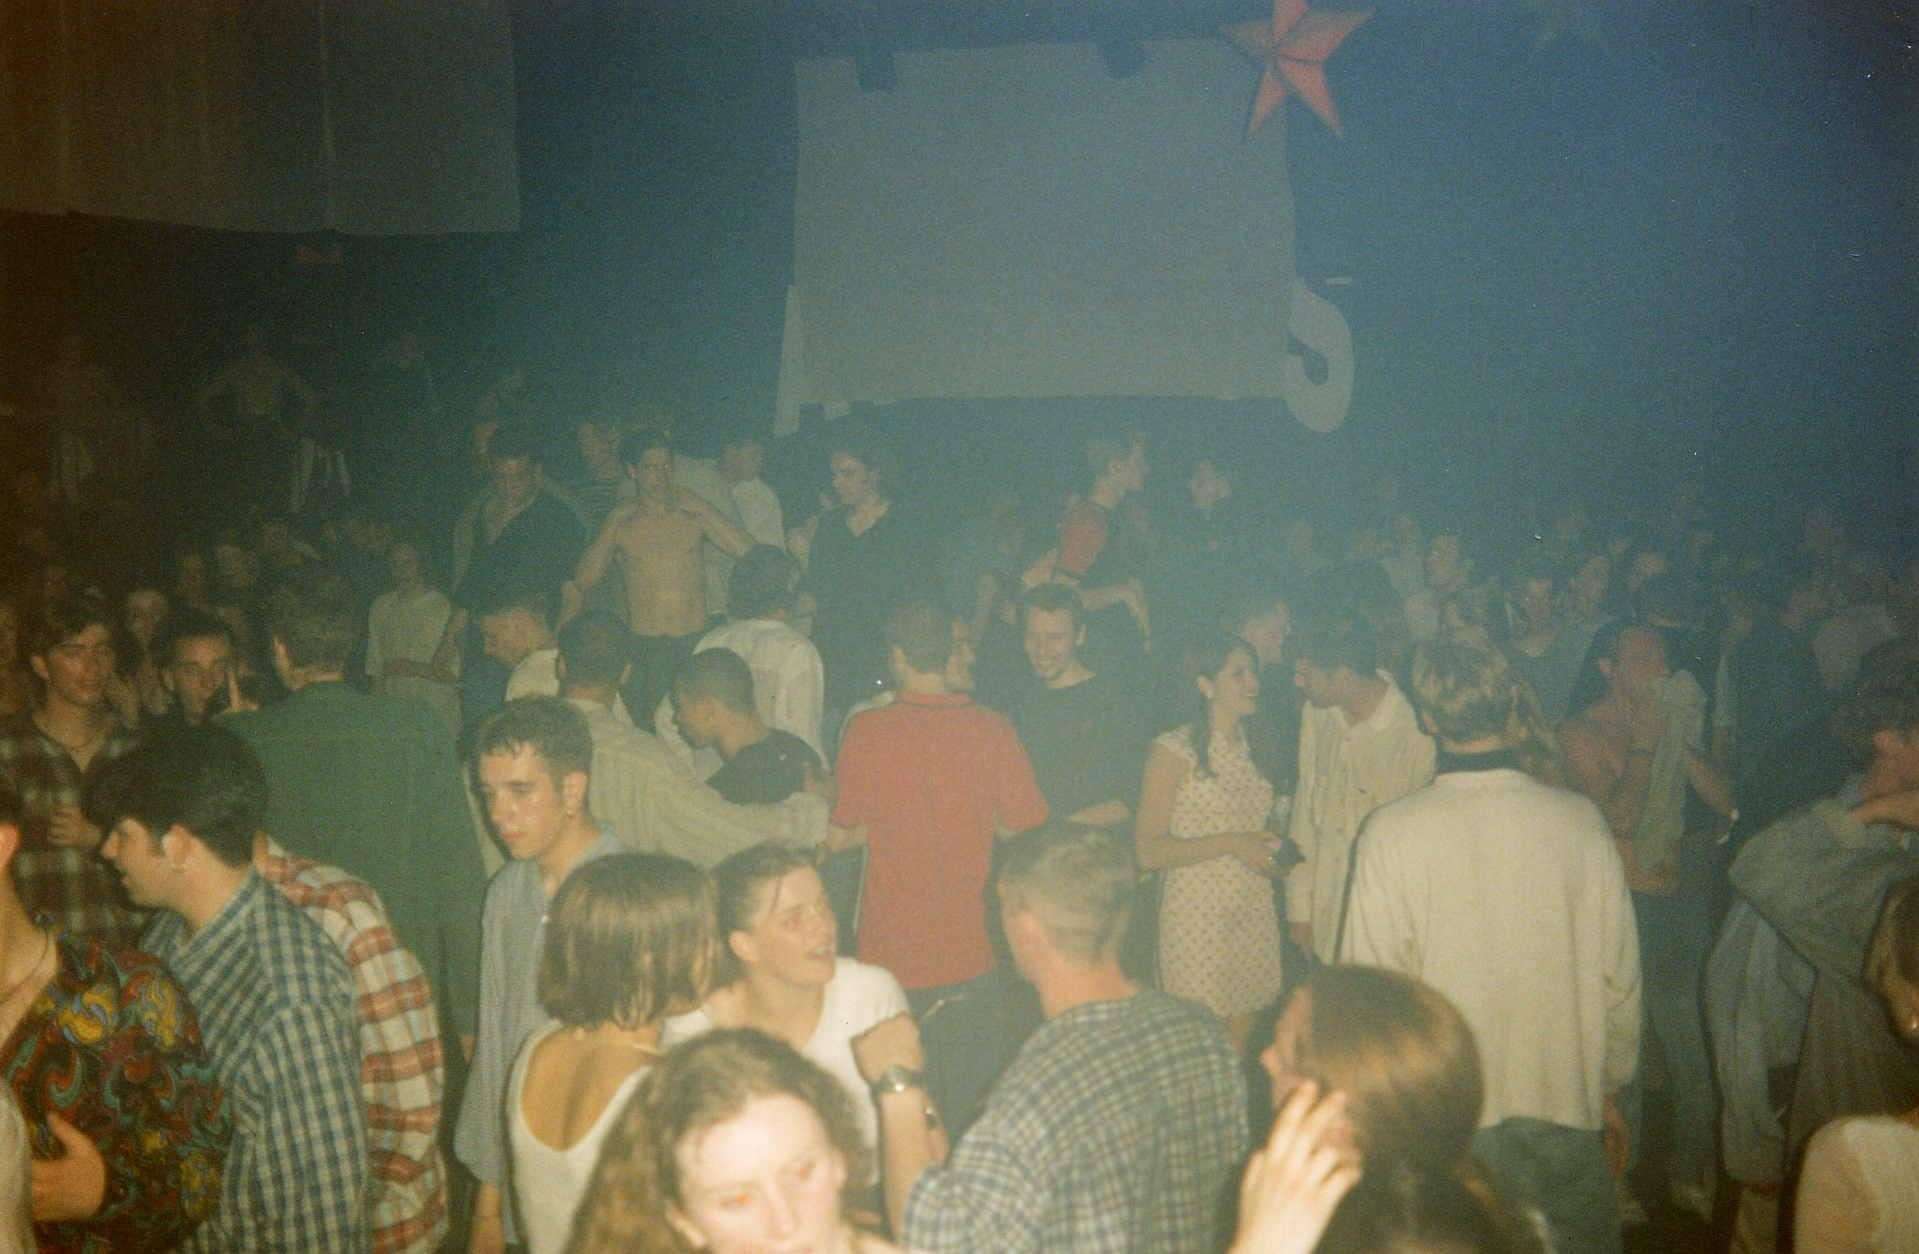 Atomics crowd in 1995. Picture: Mick Clark